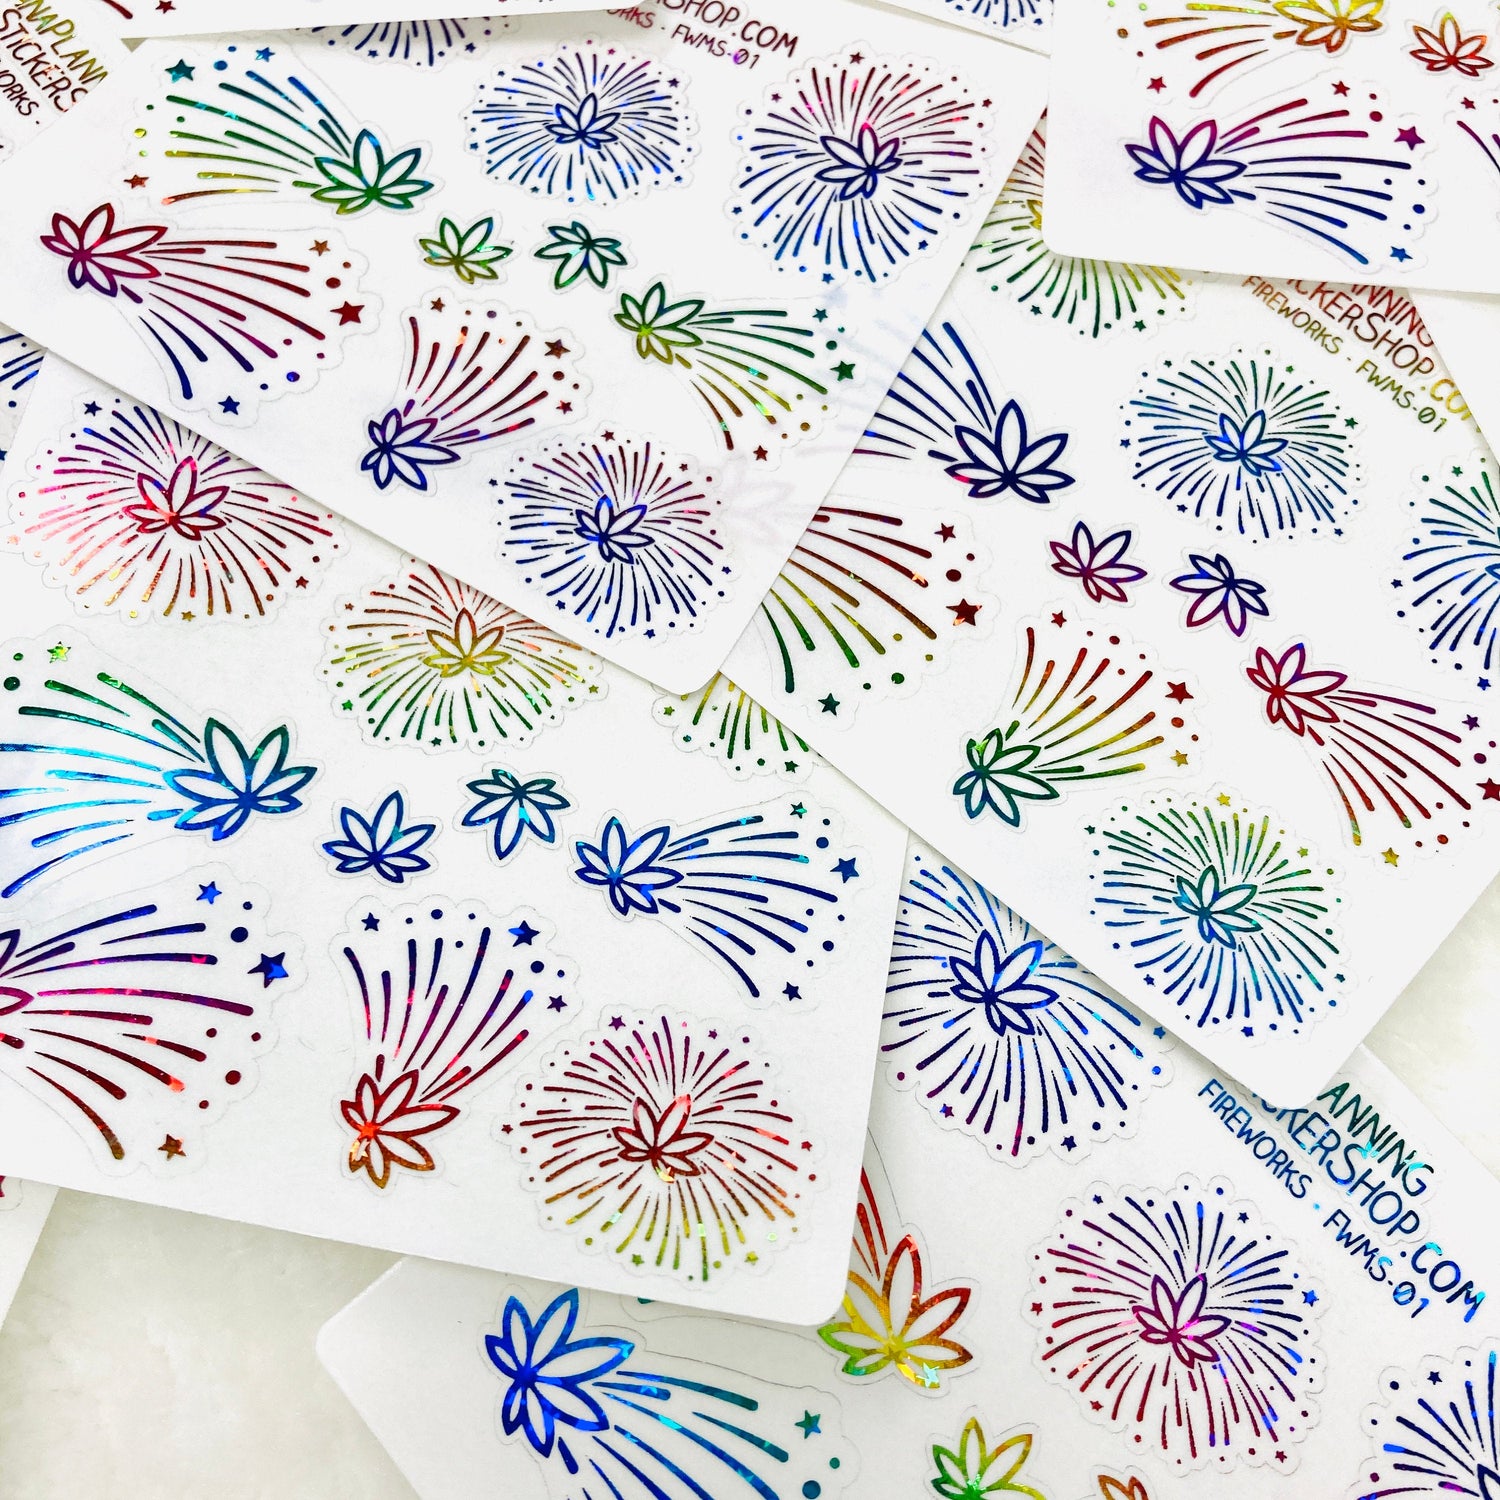  Enjoy! Clear/Transparent Foiled Stickers (#004-CF) : Handmade  Products